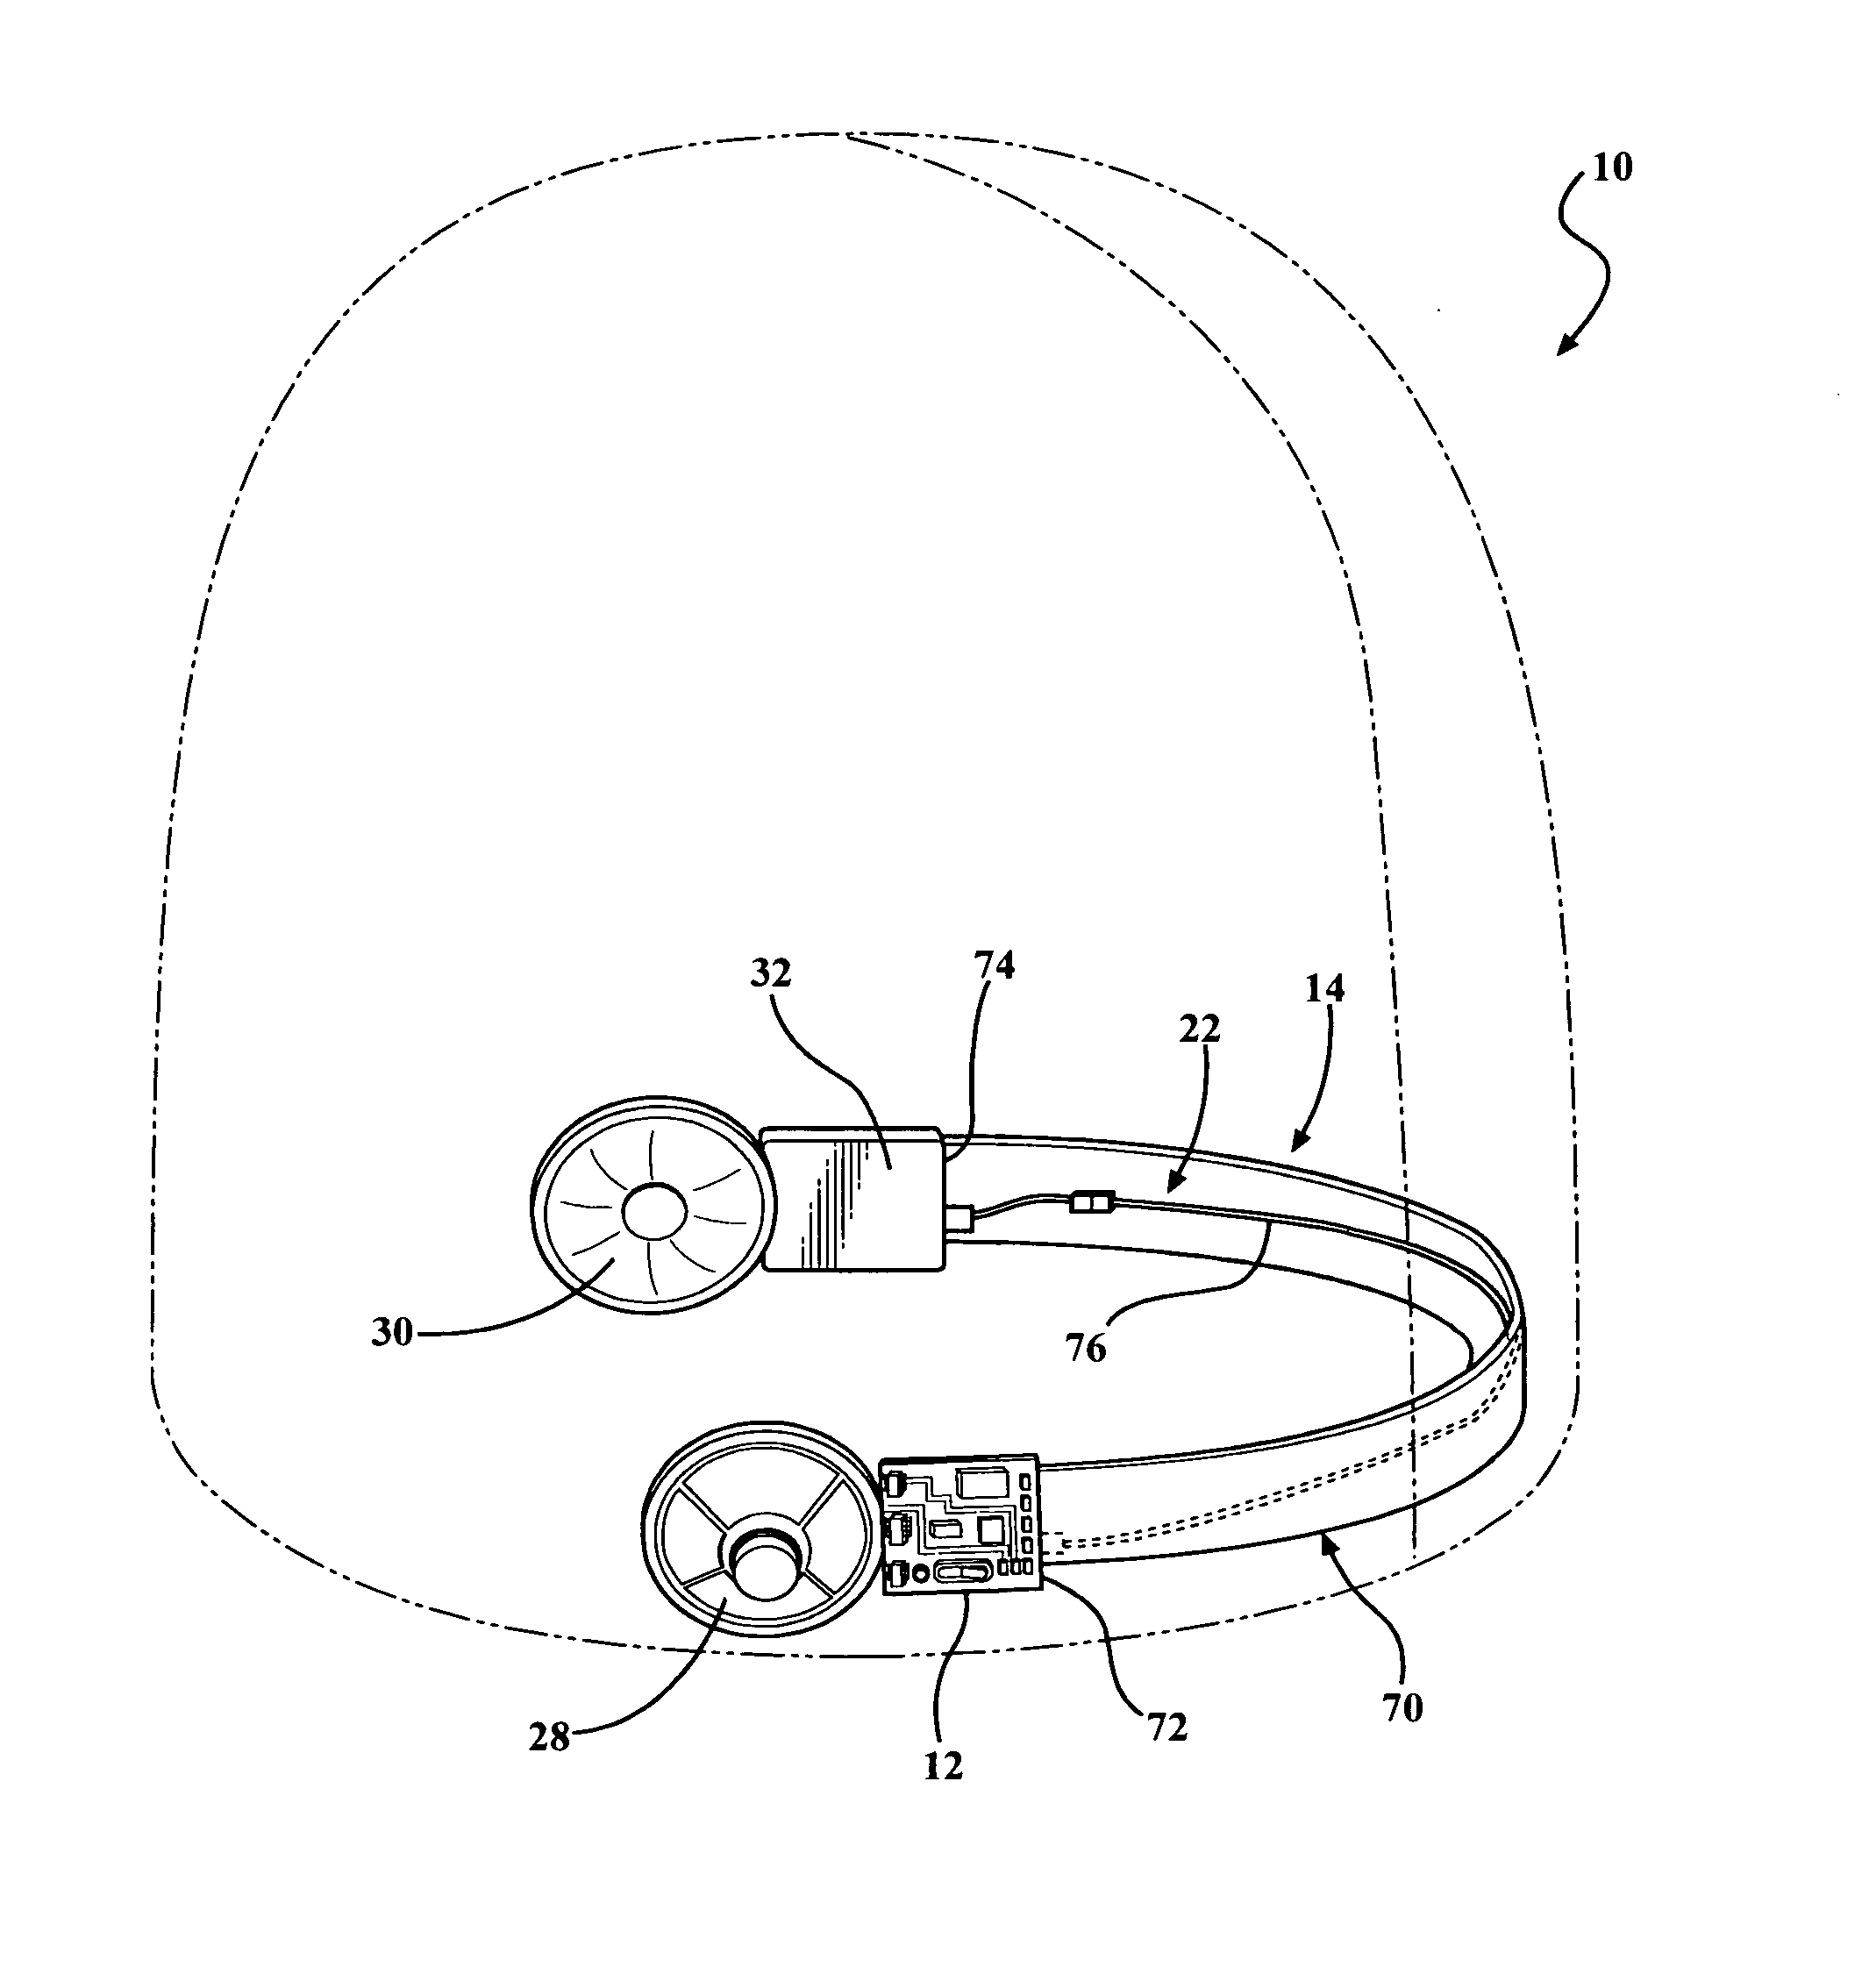 Hat with sound playing device